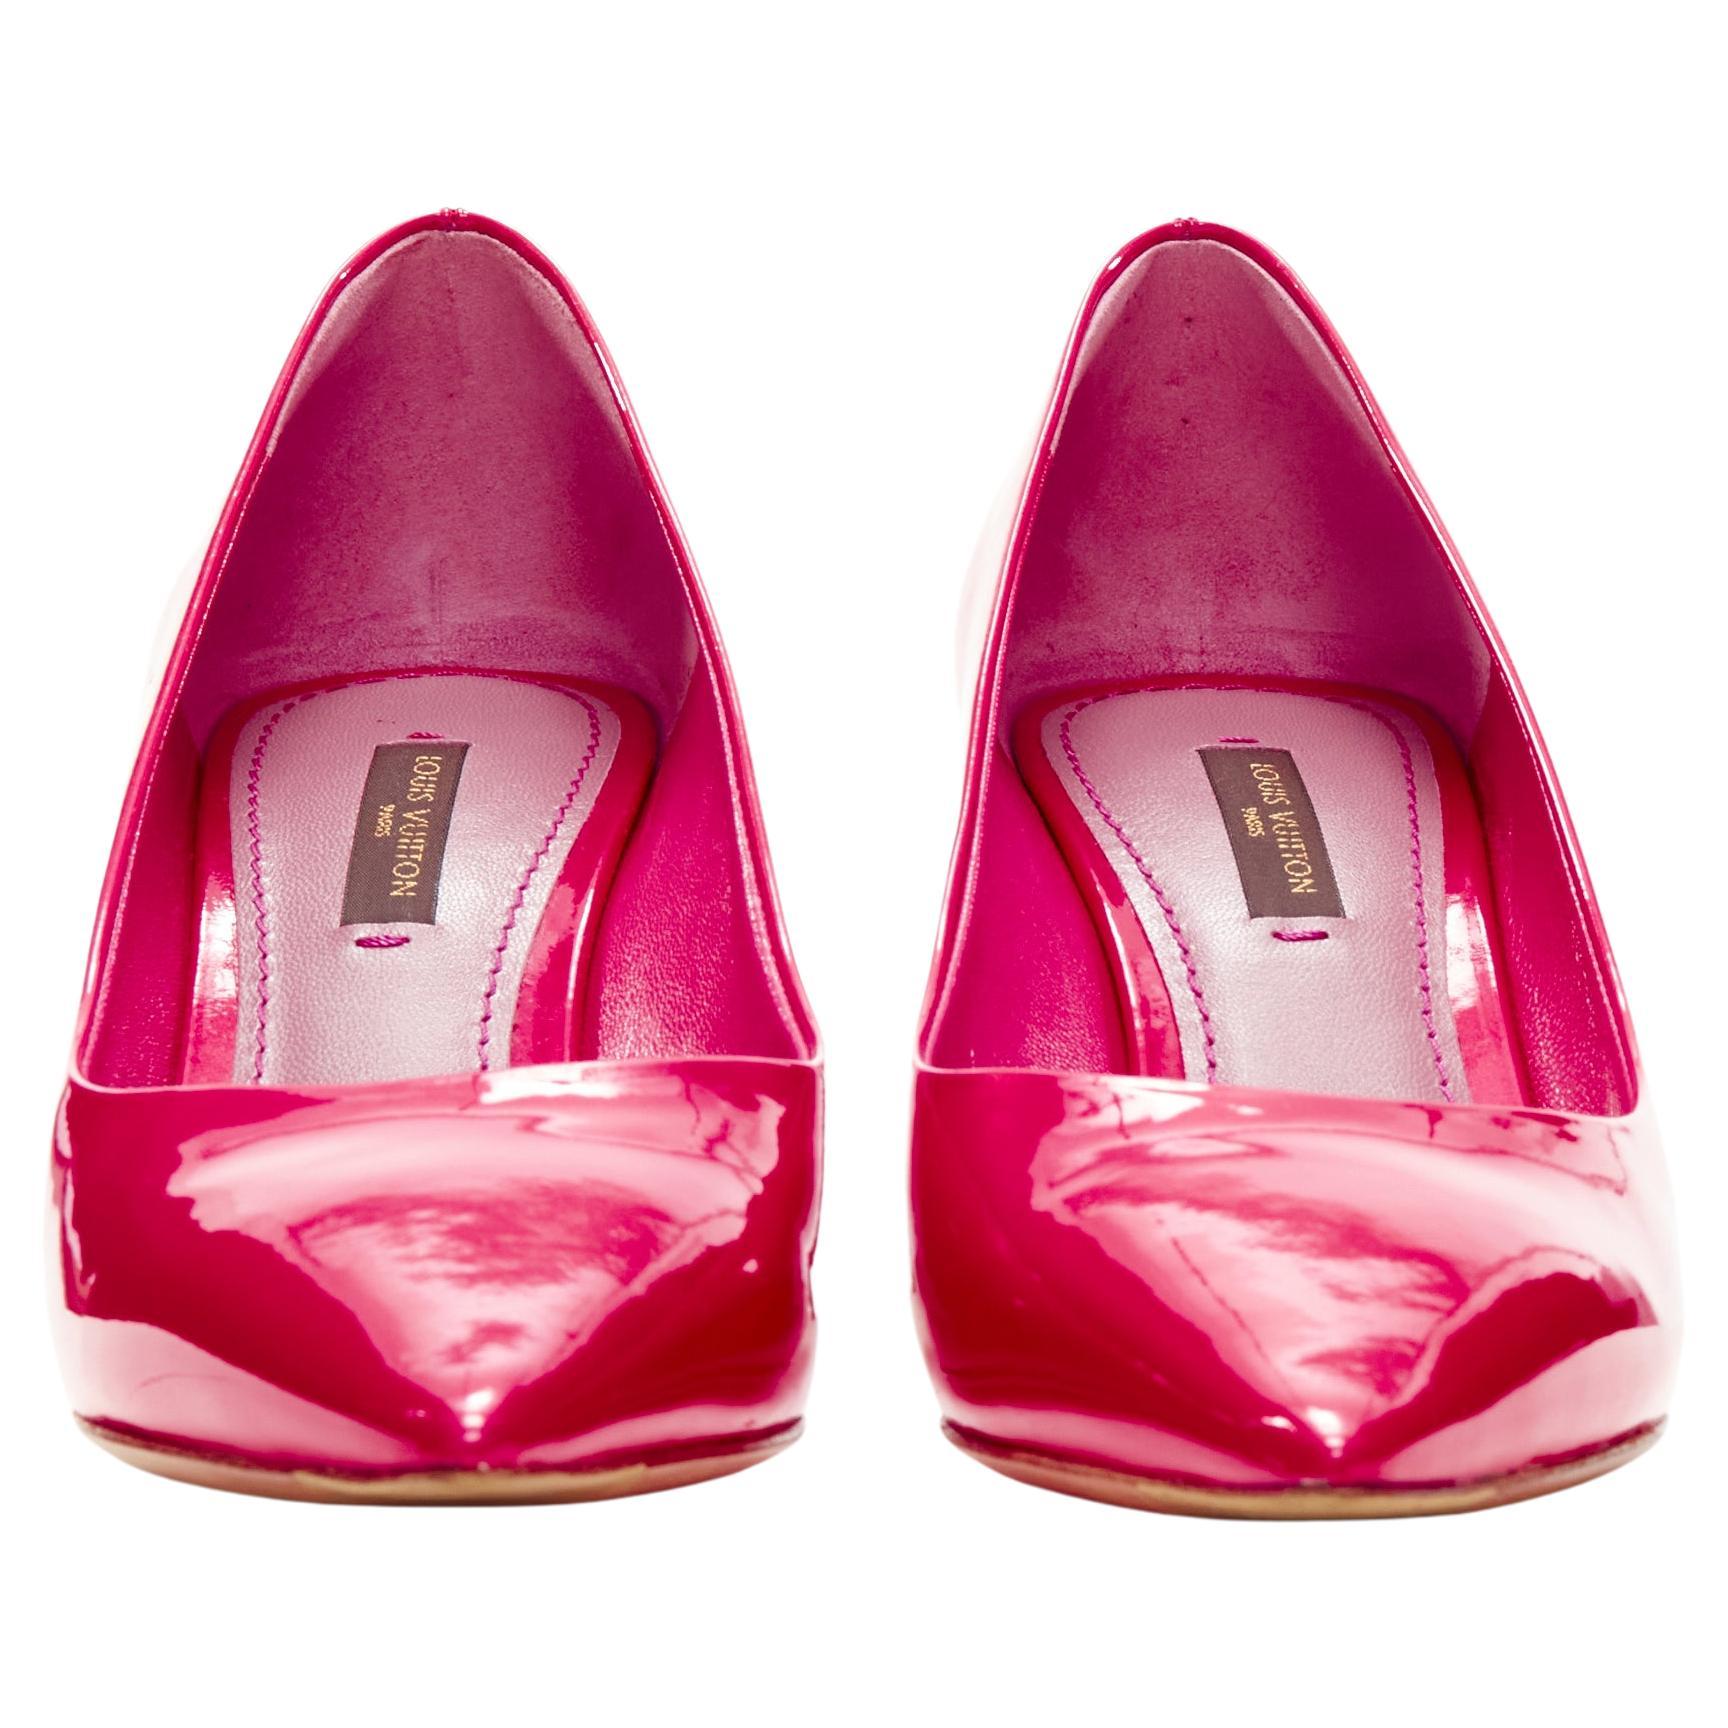 new LOUIS VUITTON pink patent gold logo plate mid point toe pump EU36.5
Brand: Louis Vuitton
Material: Patent Leather
Color: Pink
Pattern: Solid
Extra Detail: Gold-tone metal plate at heel.
Made in: Italy

CONDITION:
Condition: New without tags.